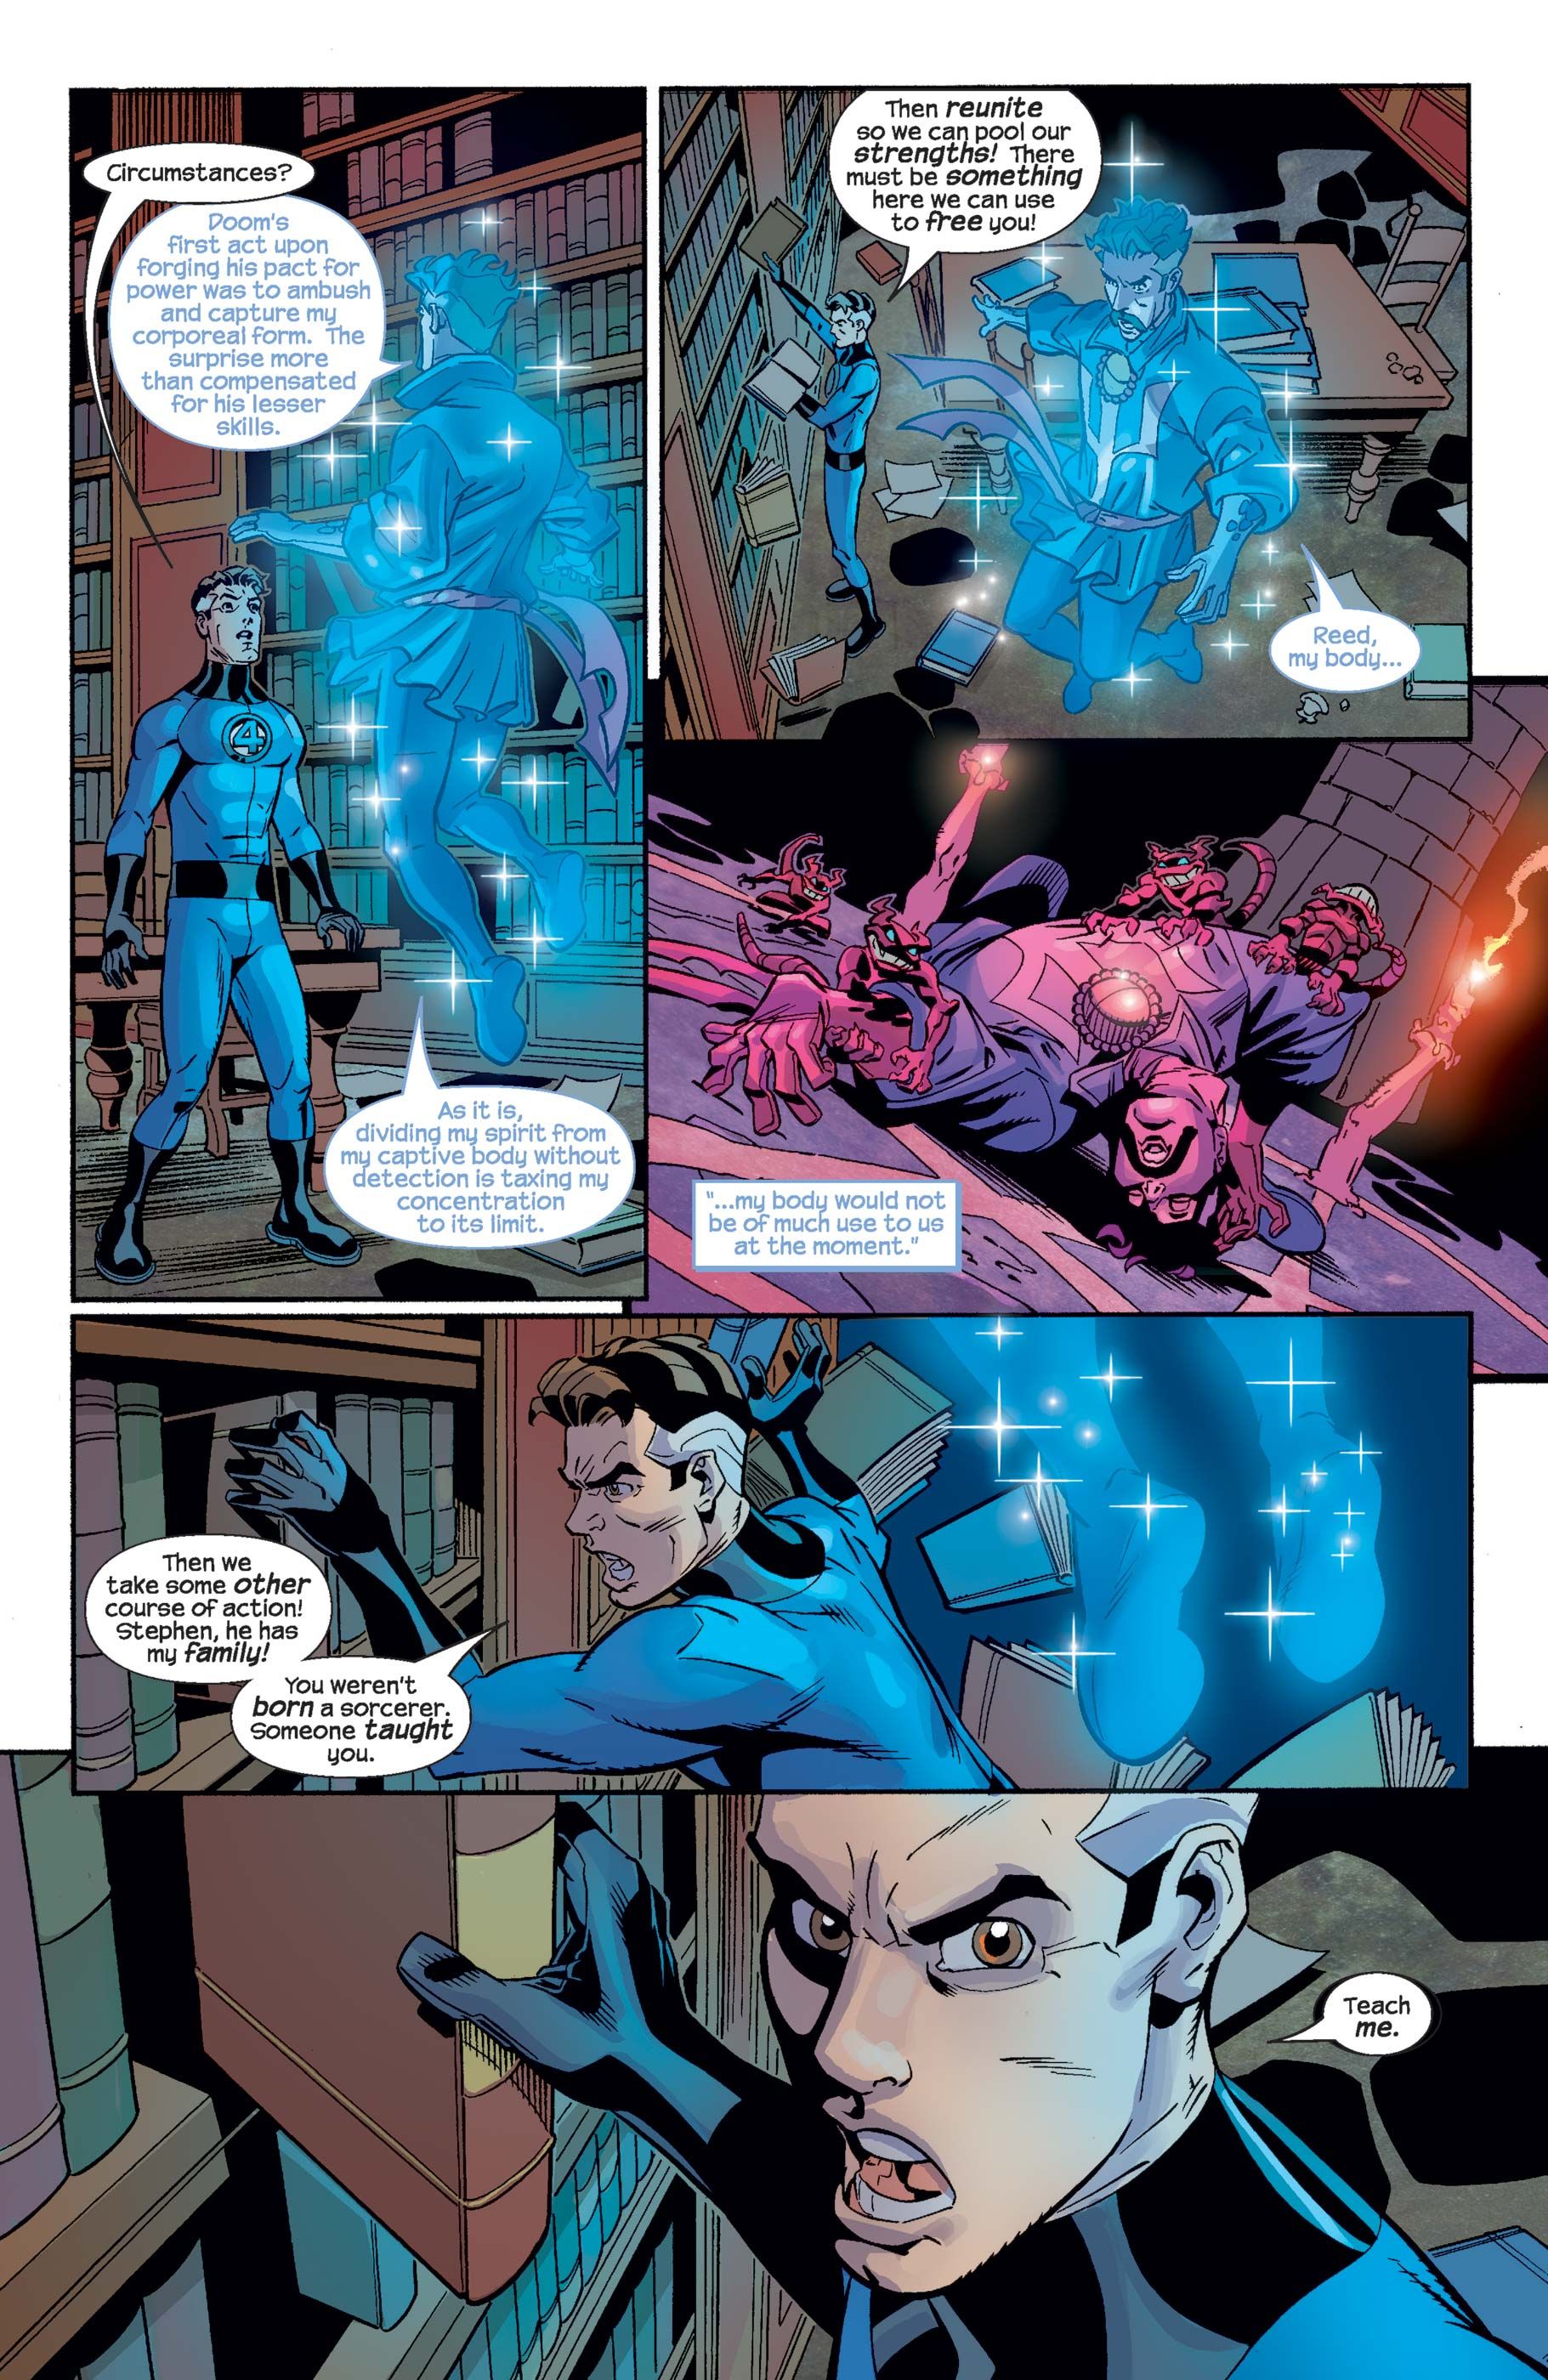 Reed Richards asks Doctor Strange to teach him magic in Fantastic Four #500